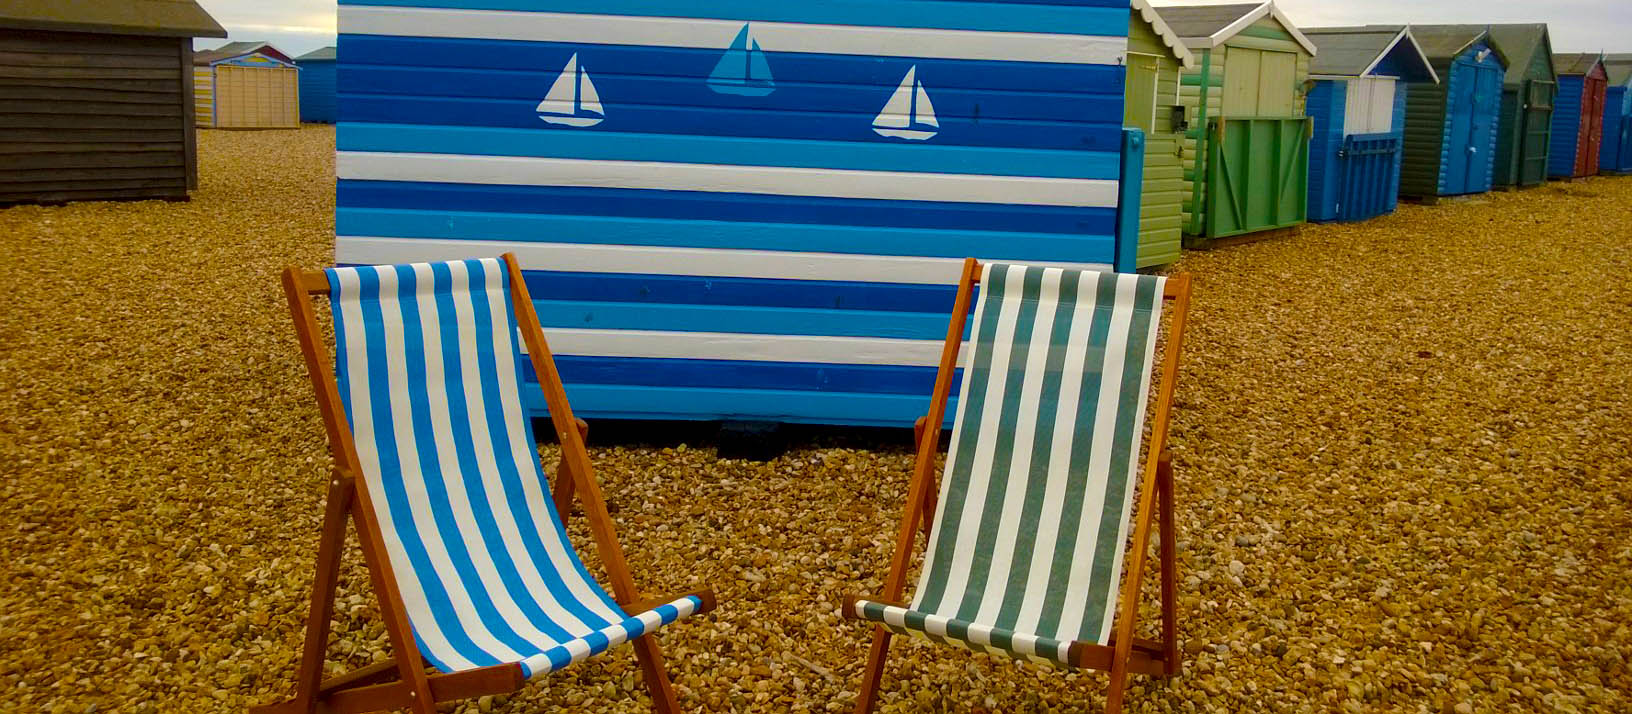 Deck Chair Hire | Vintage | UK | Rental | Anywhere Deck Chairs